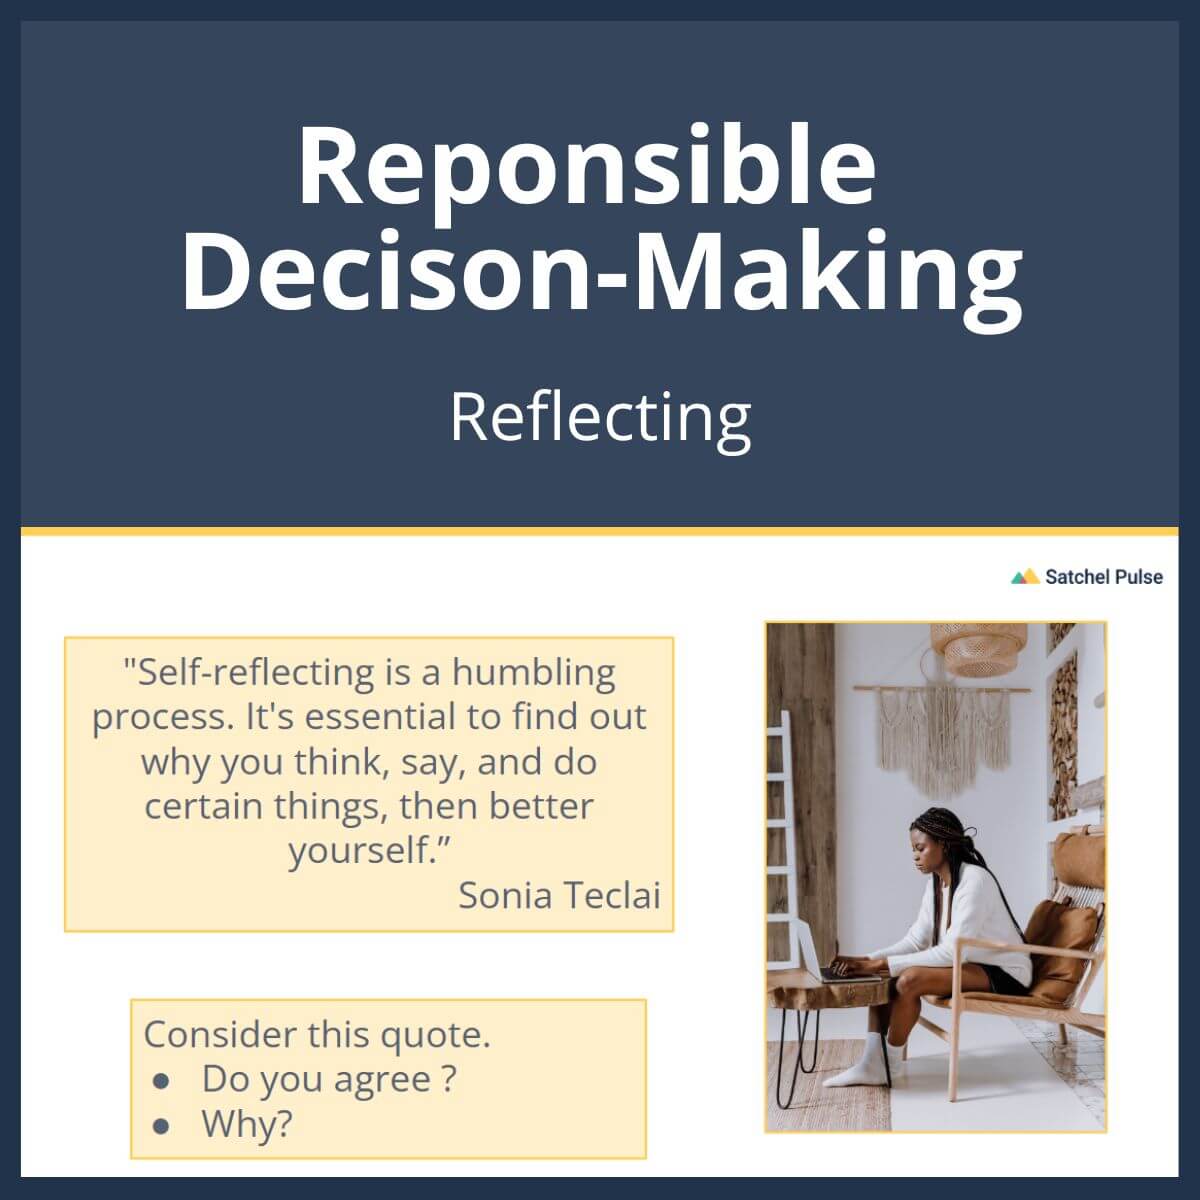 SEL Lesson focusing on Reflecting to use in your classroom as one of your SEL activities for Responsible Decision-Making